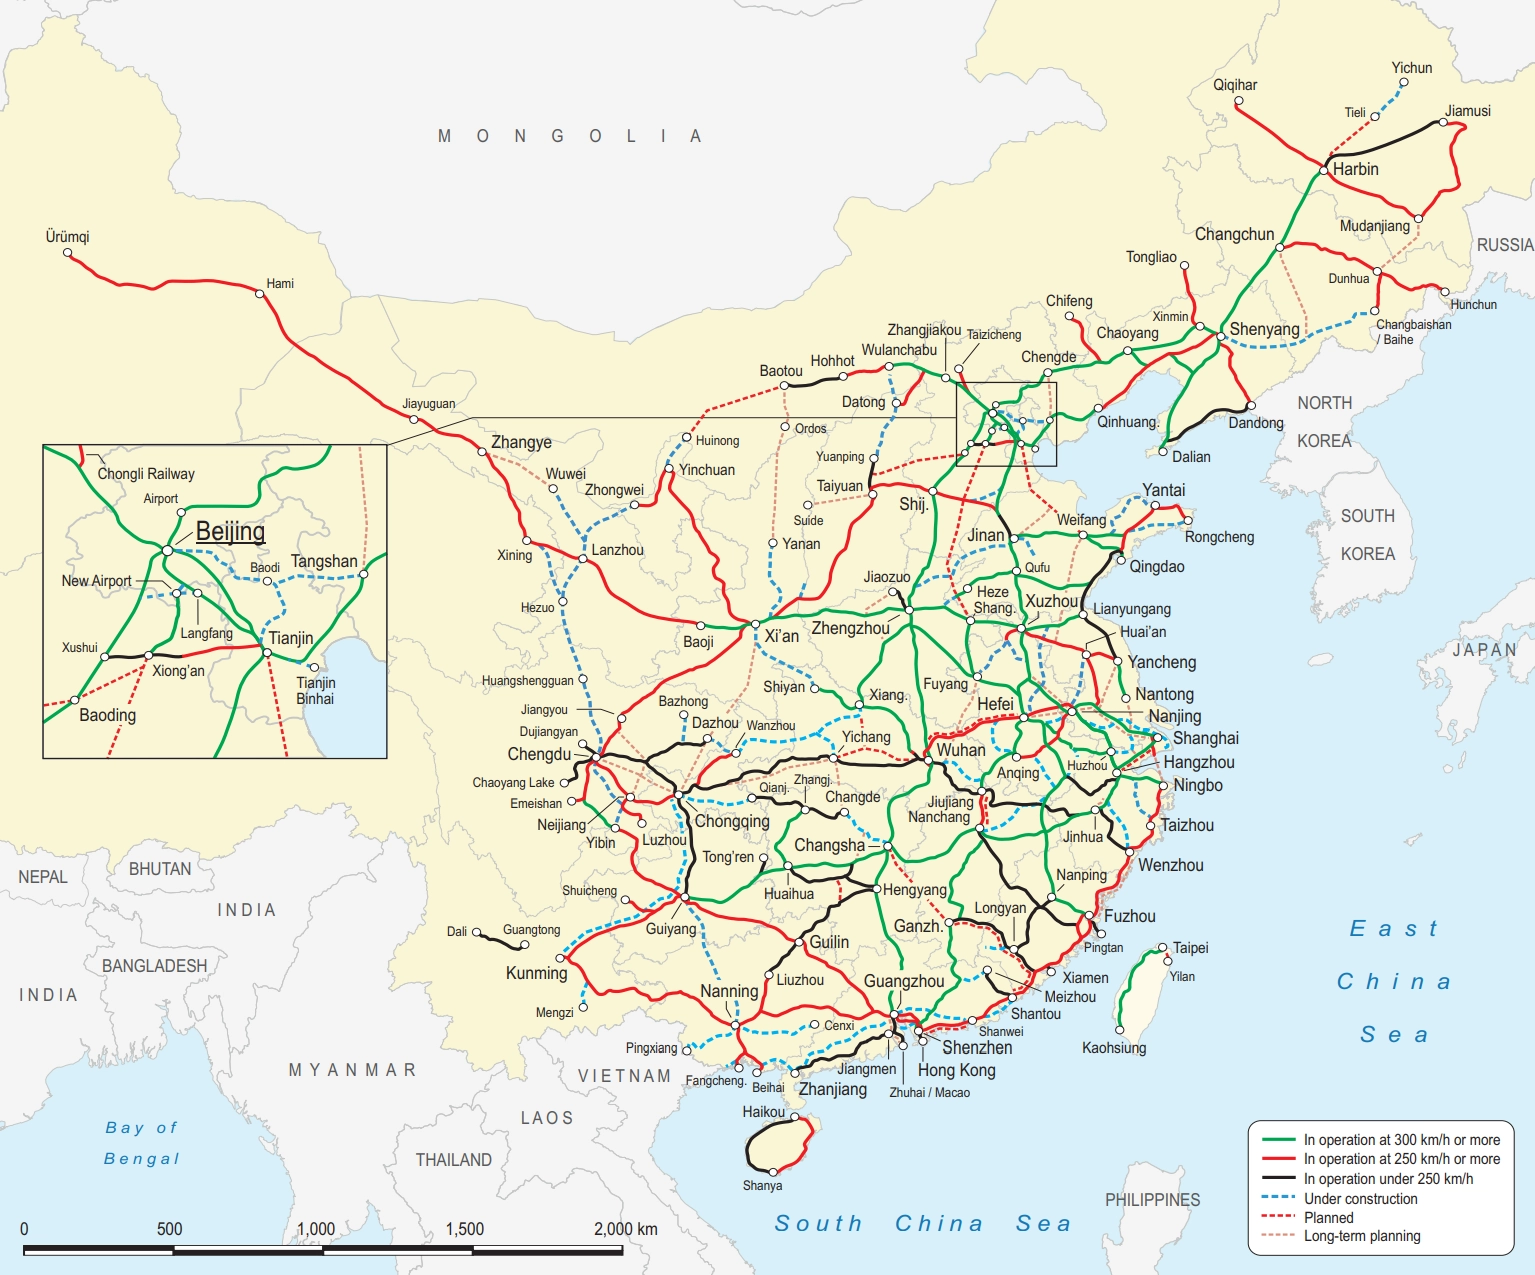 High-speed train lines in China